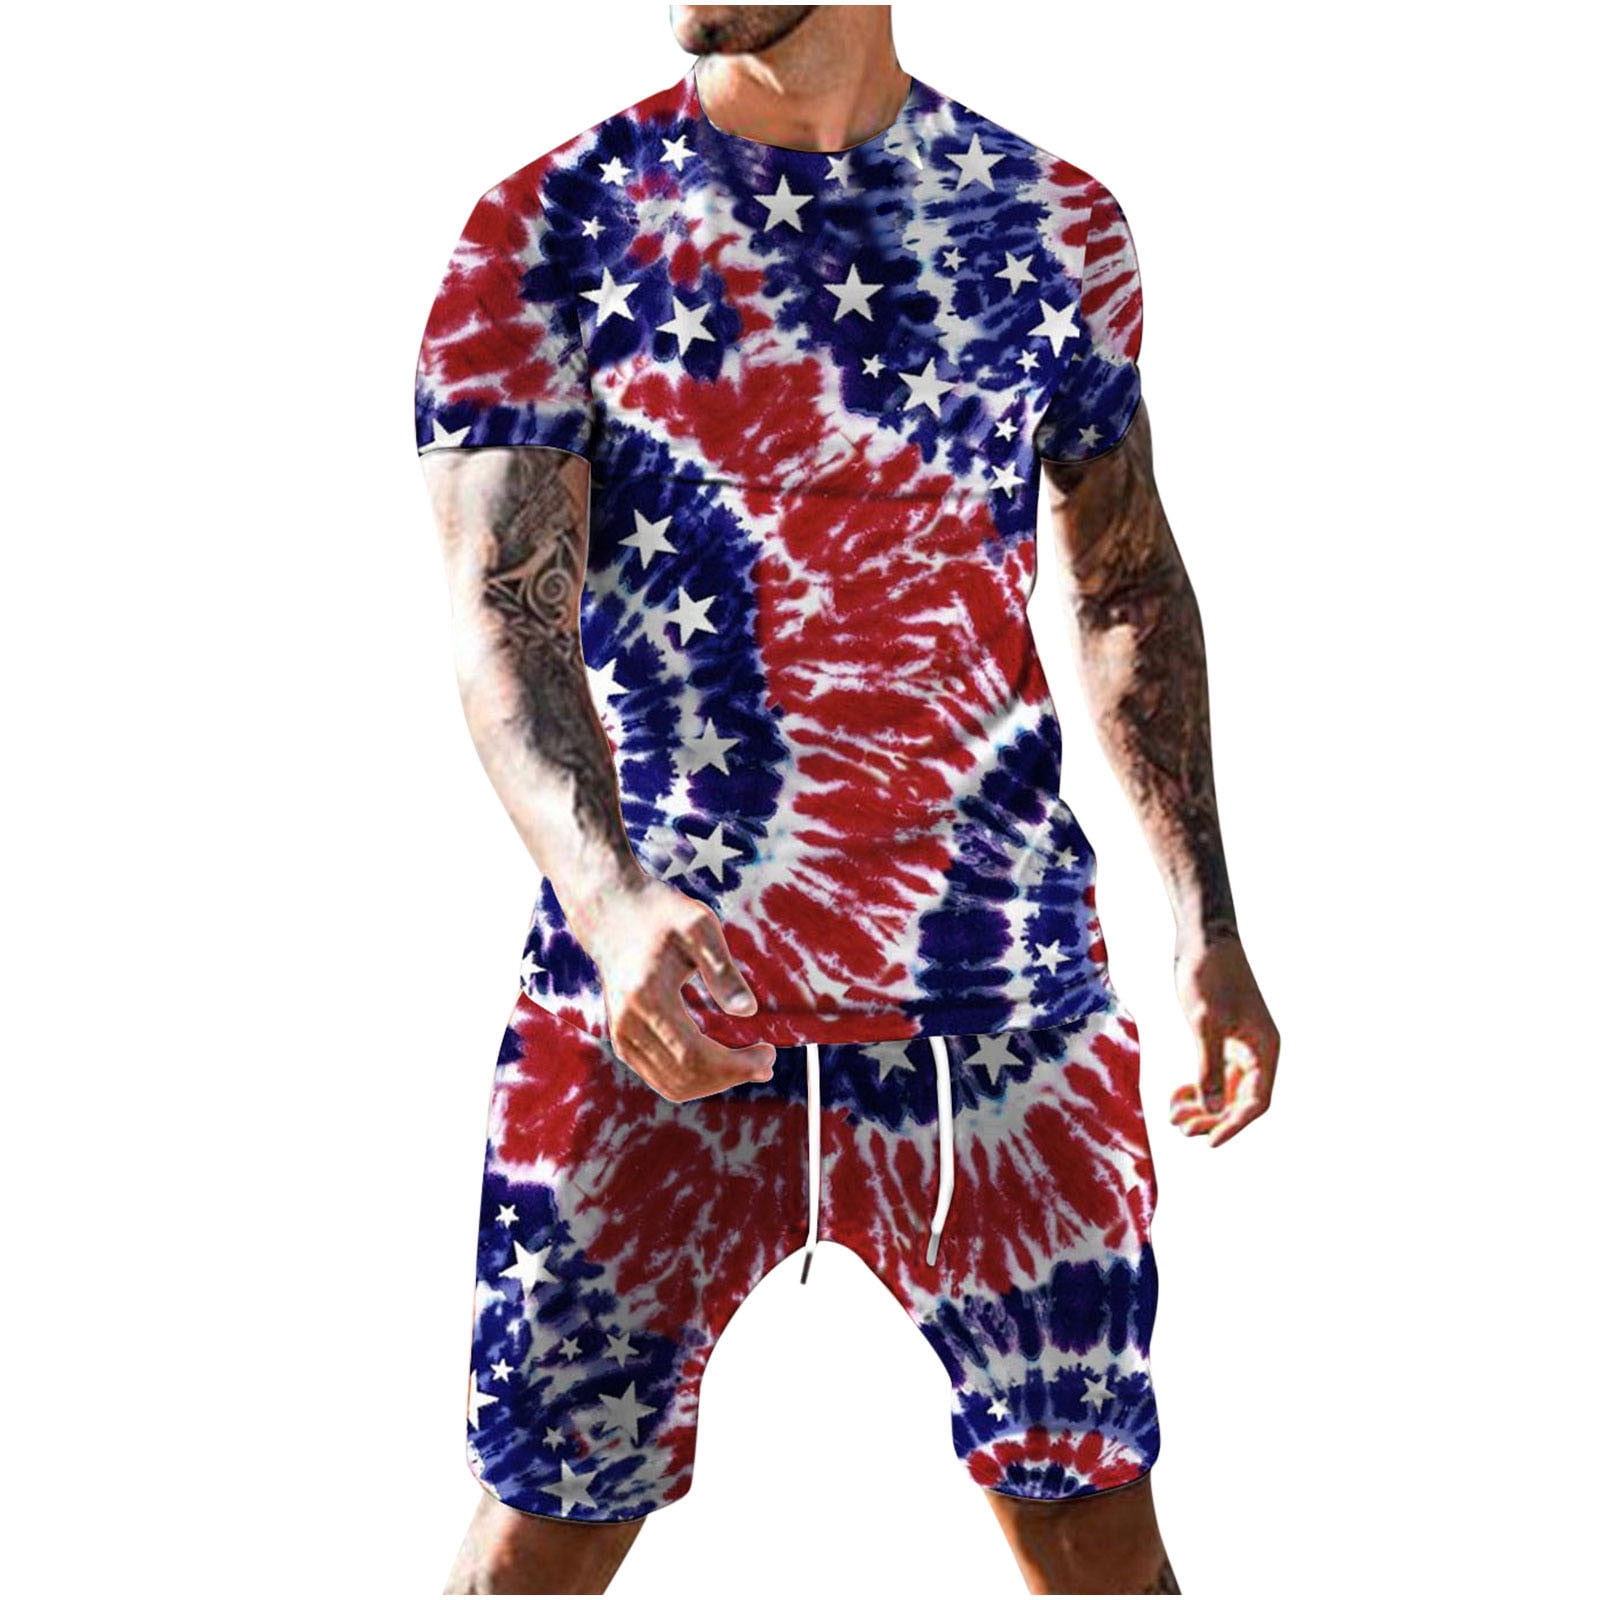 Men's Crew Neck Short Sleeve T Shirts Big V Fire Flag Print Drawstring Shorts  Two Piece Suit, Free Shipping For New Users